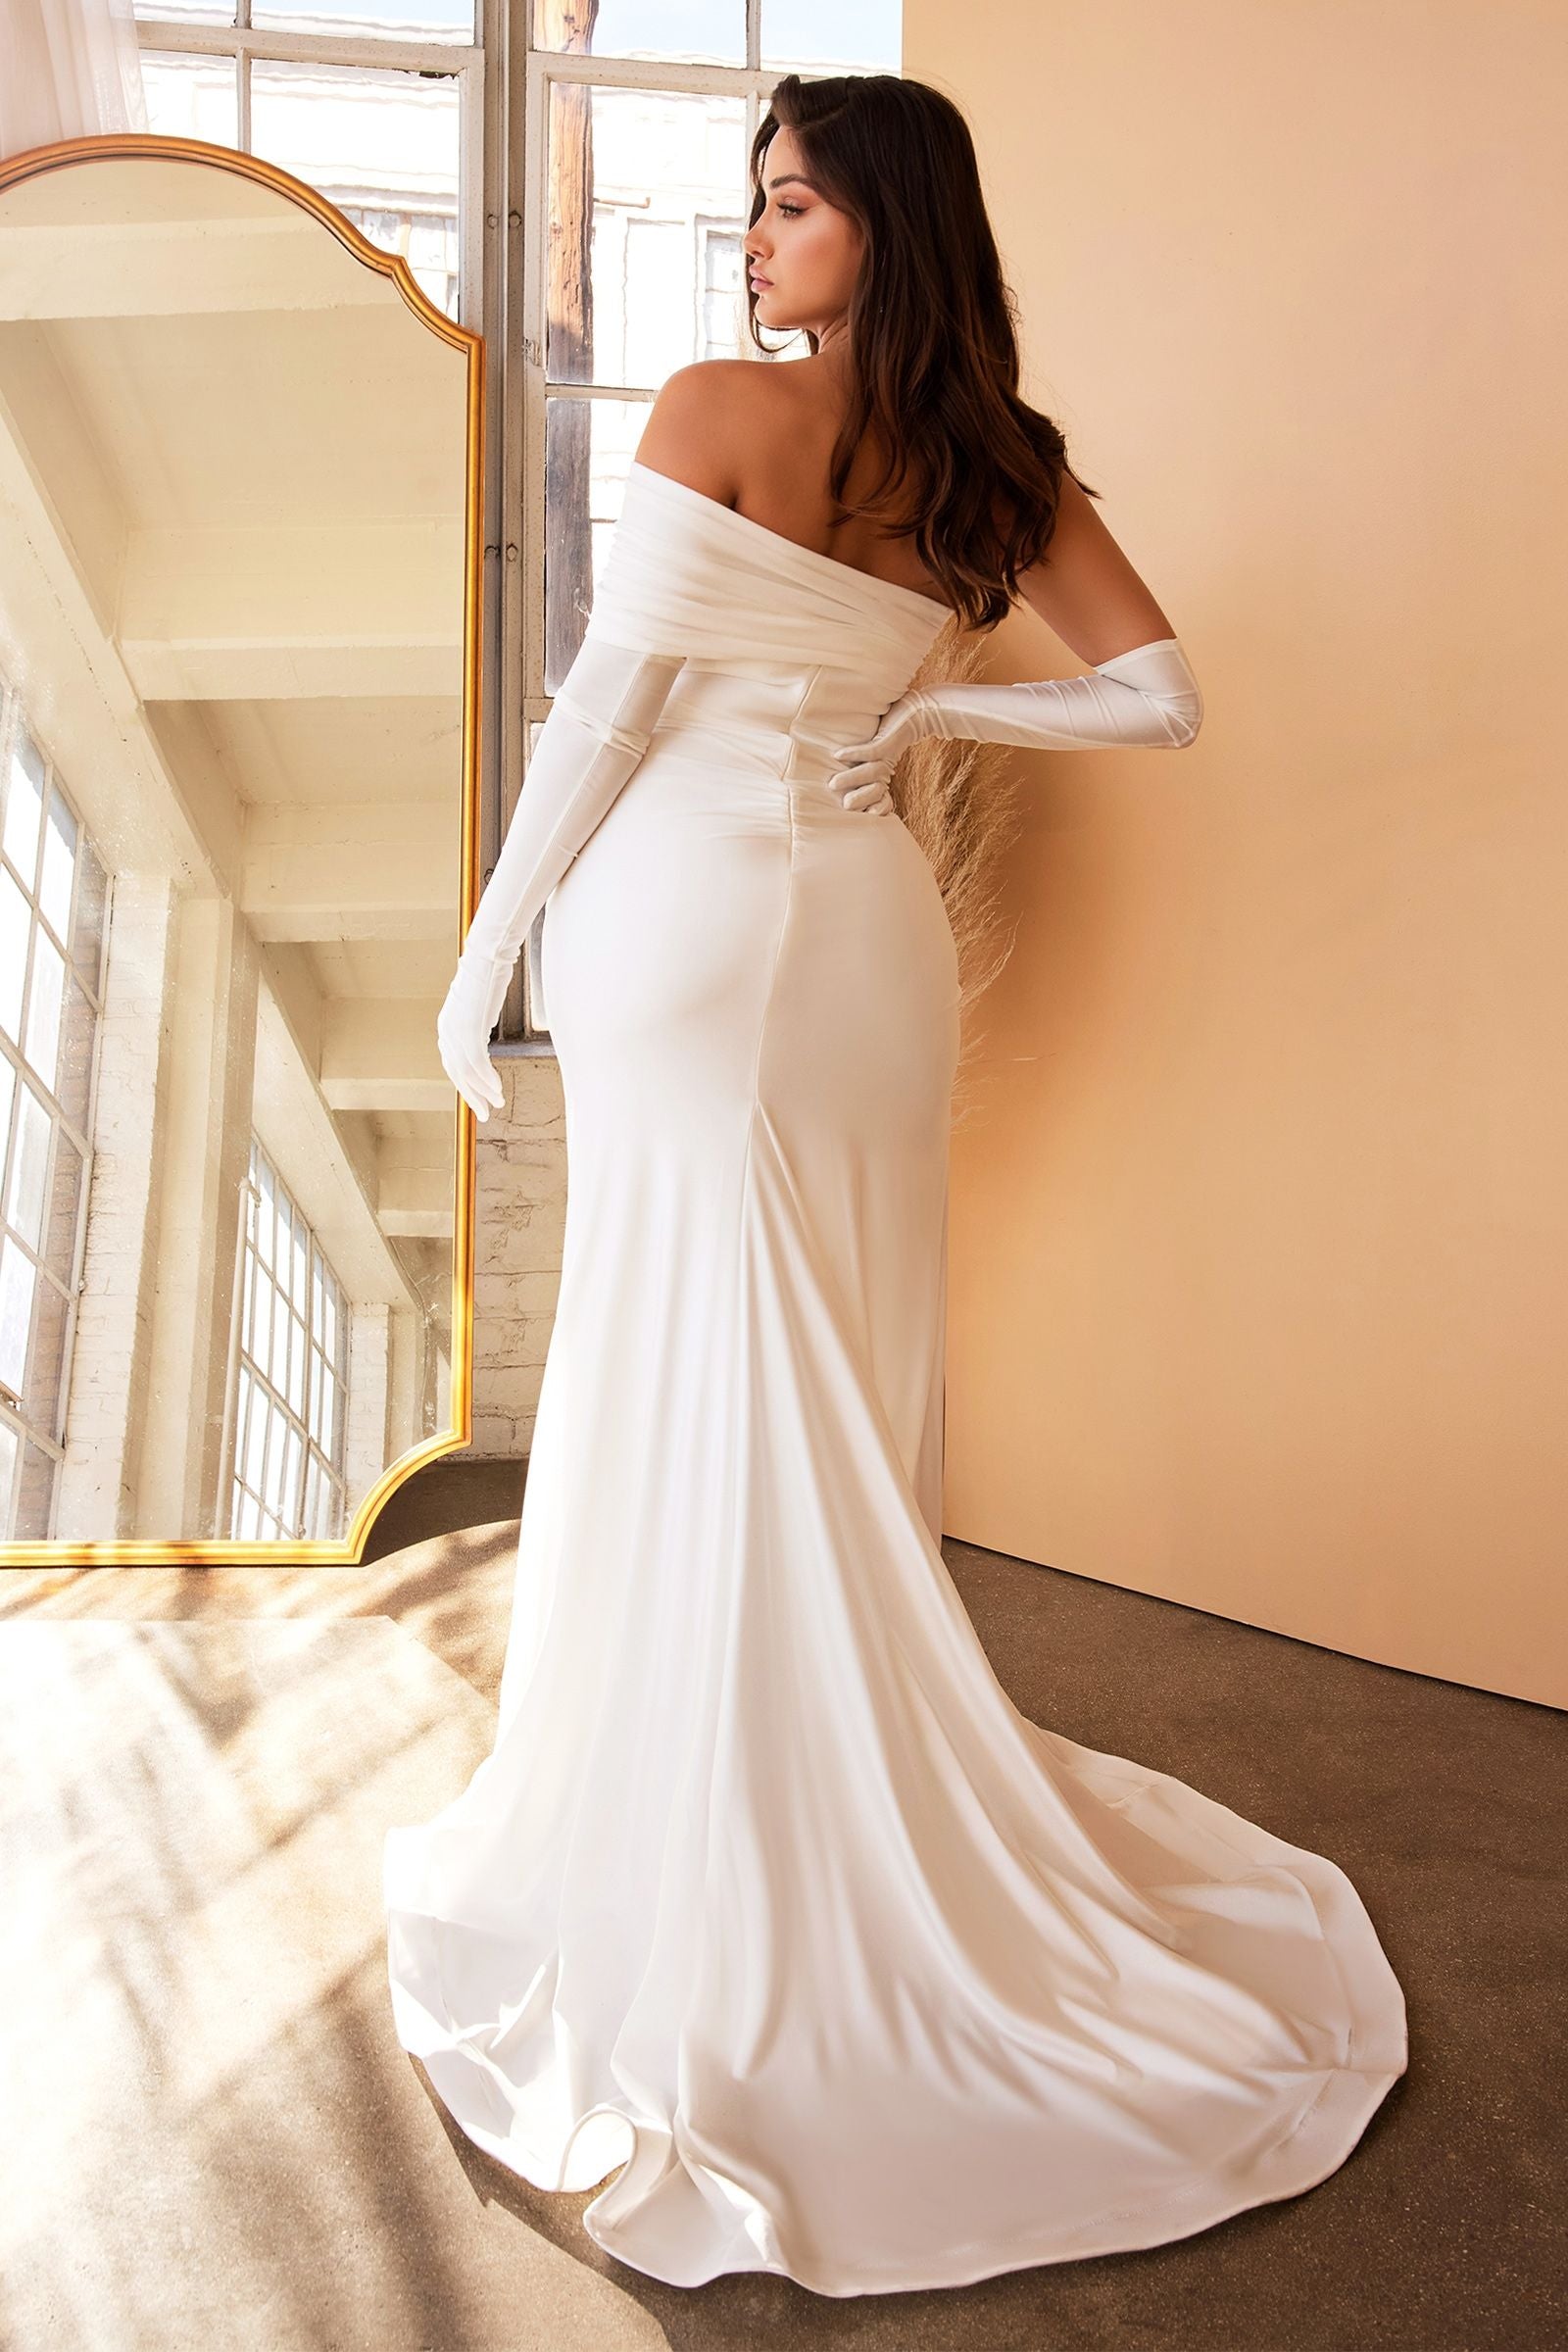 Stunning white jersey gown with a leg slit, embodying the luxurious Glamour Glove Luxe aesthetic